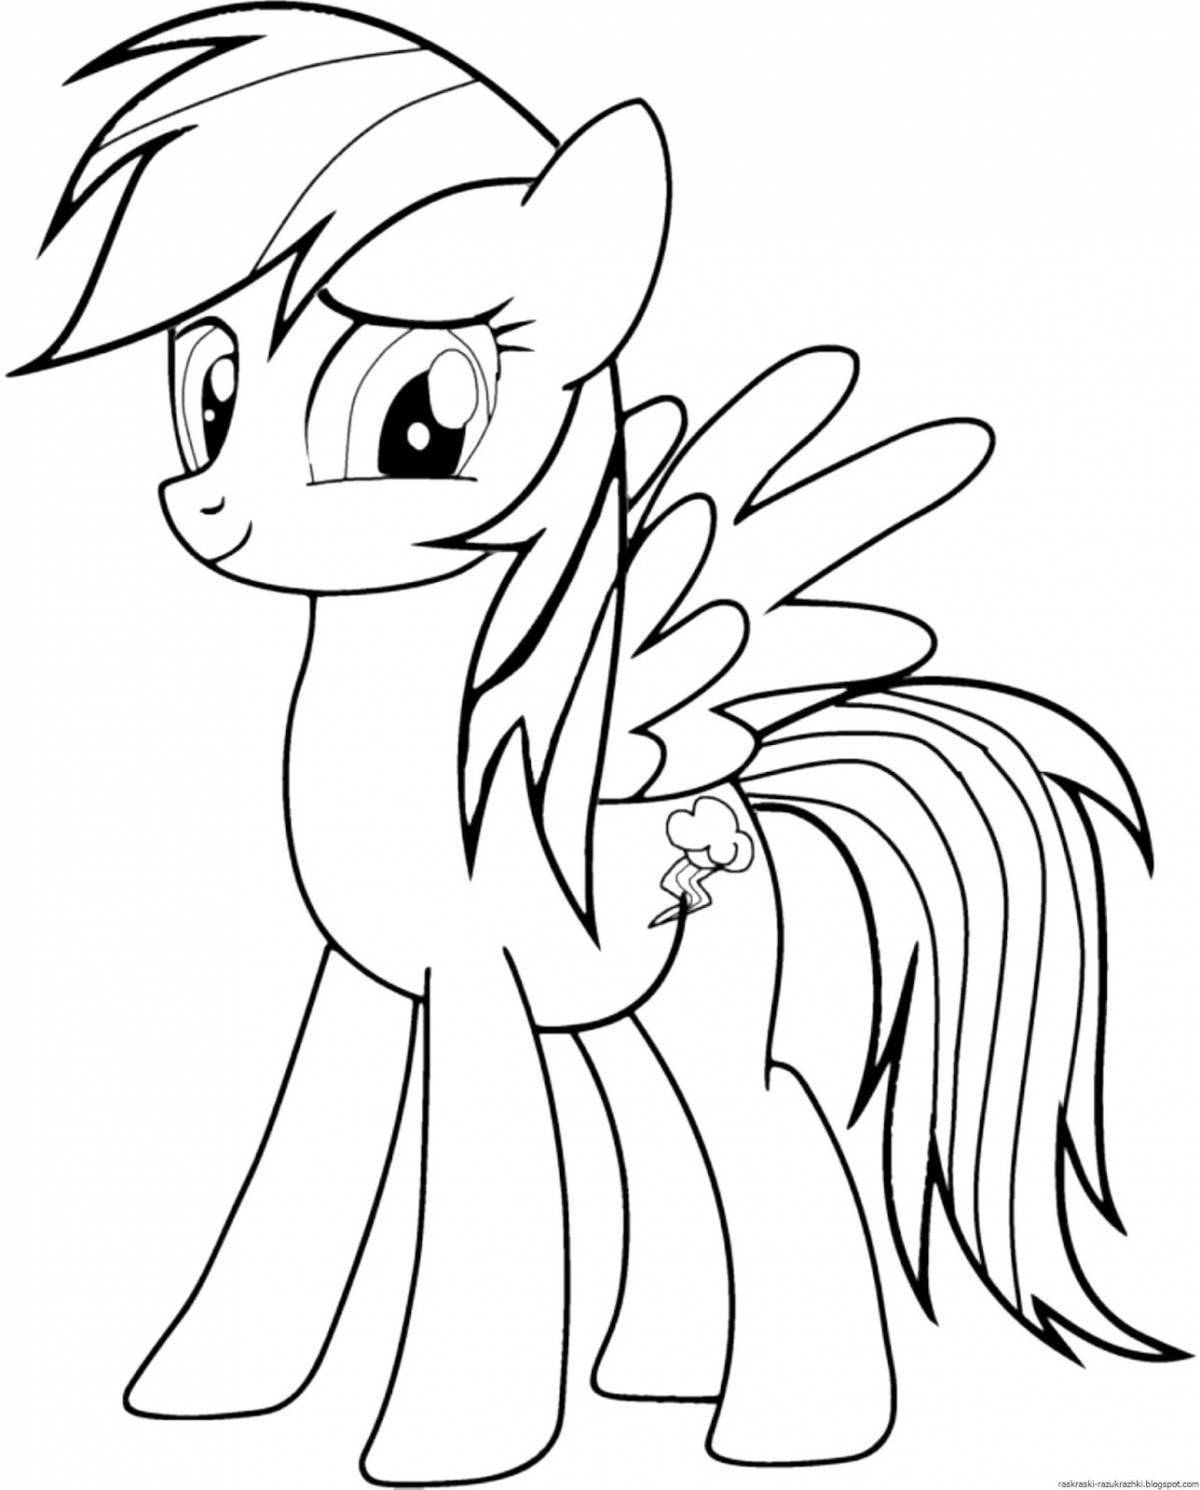 Malital pony marvelous coloring game